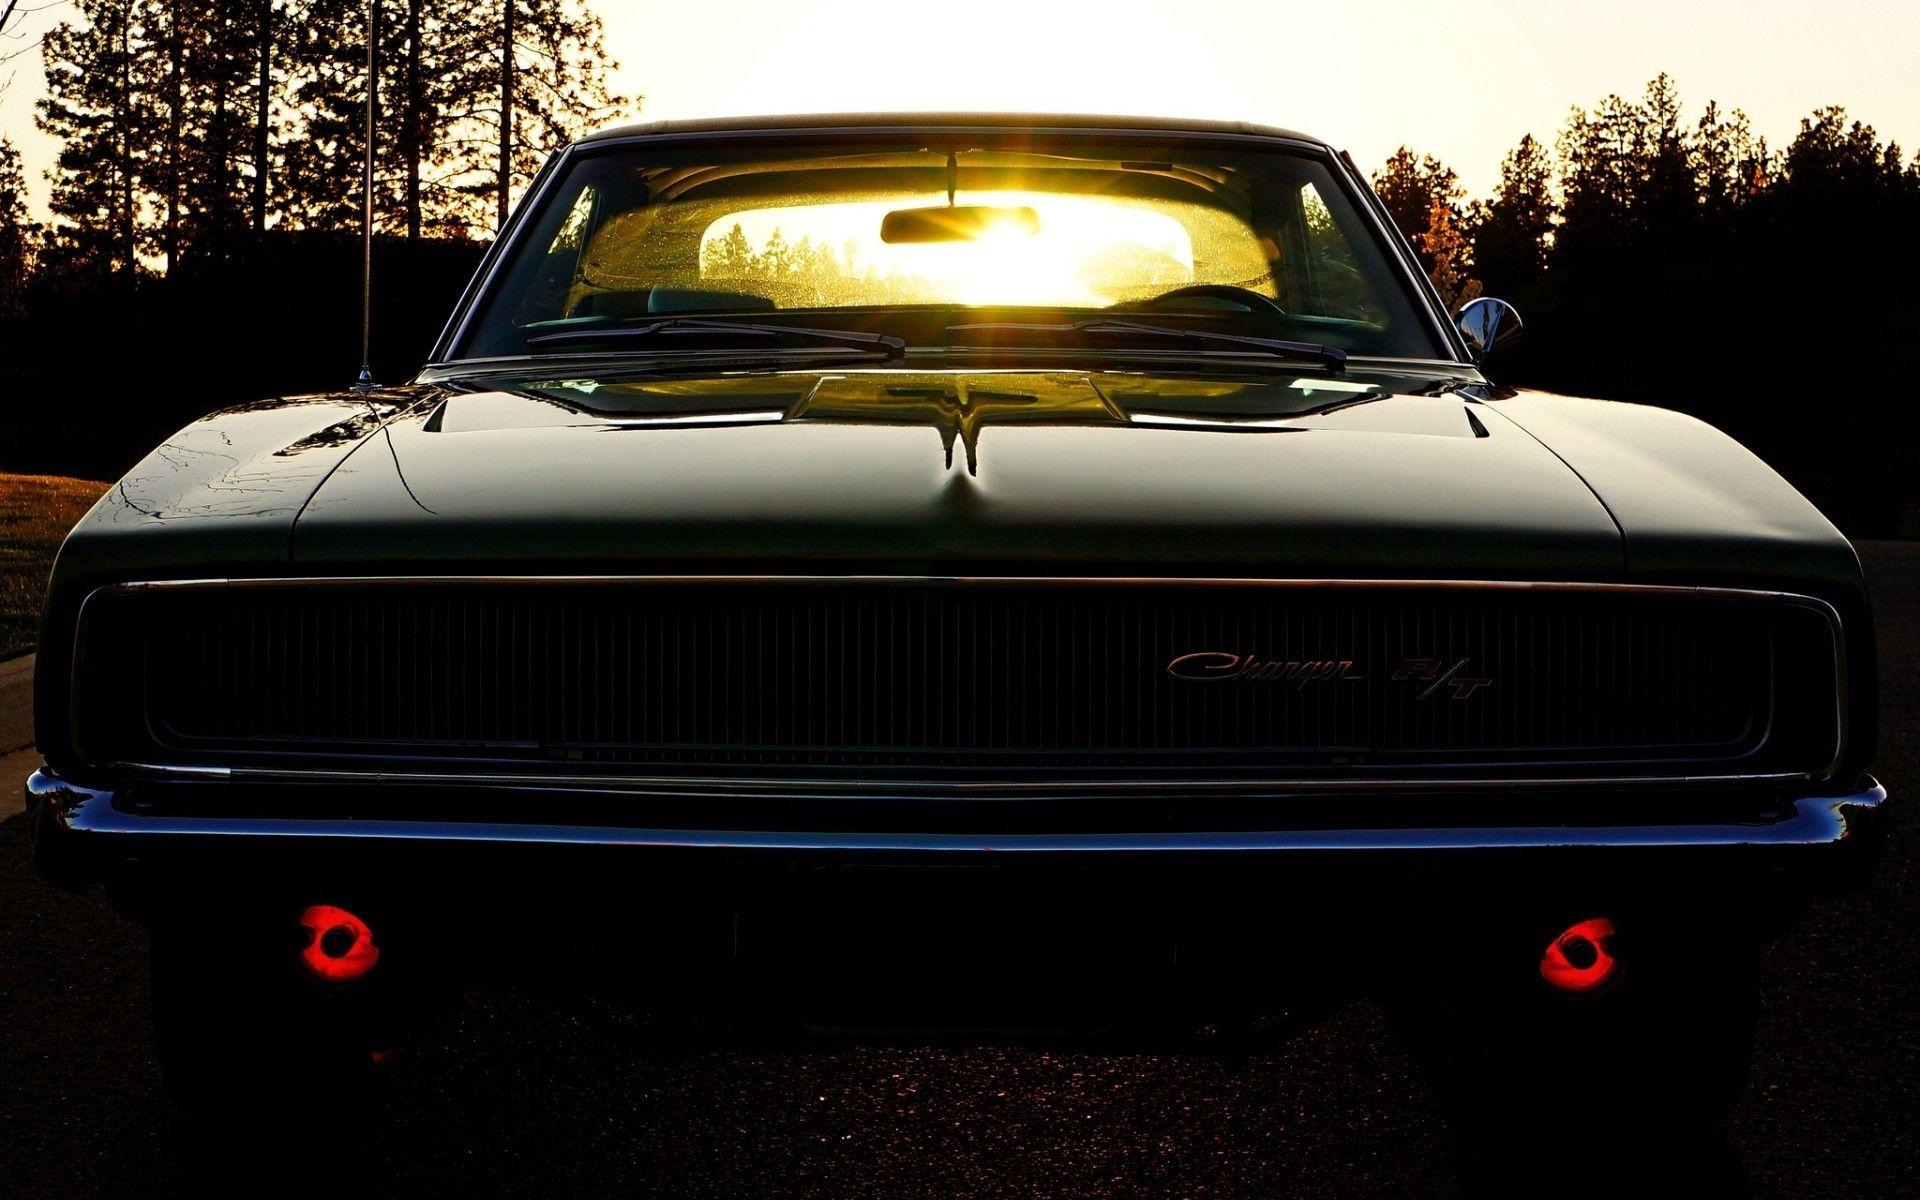 Old School Dodge Charger wallpaper. Old School Dodge Charger stock